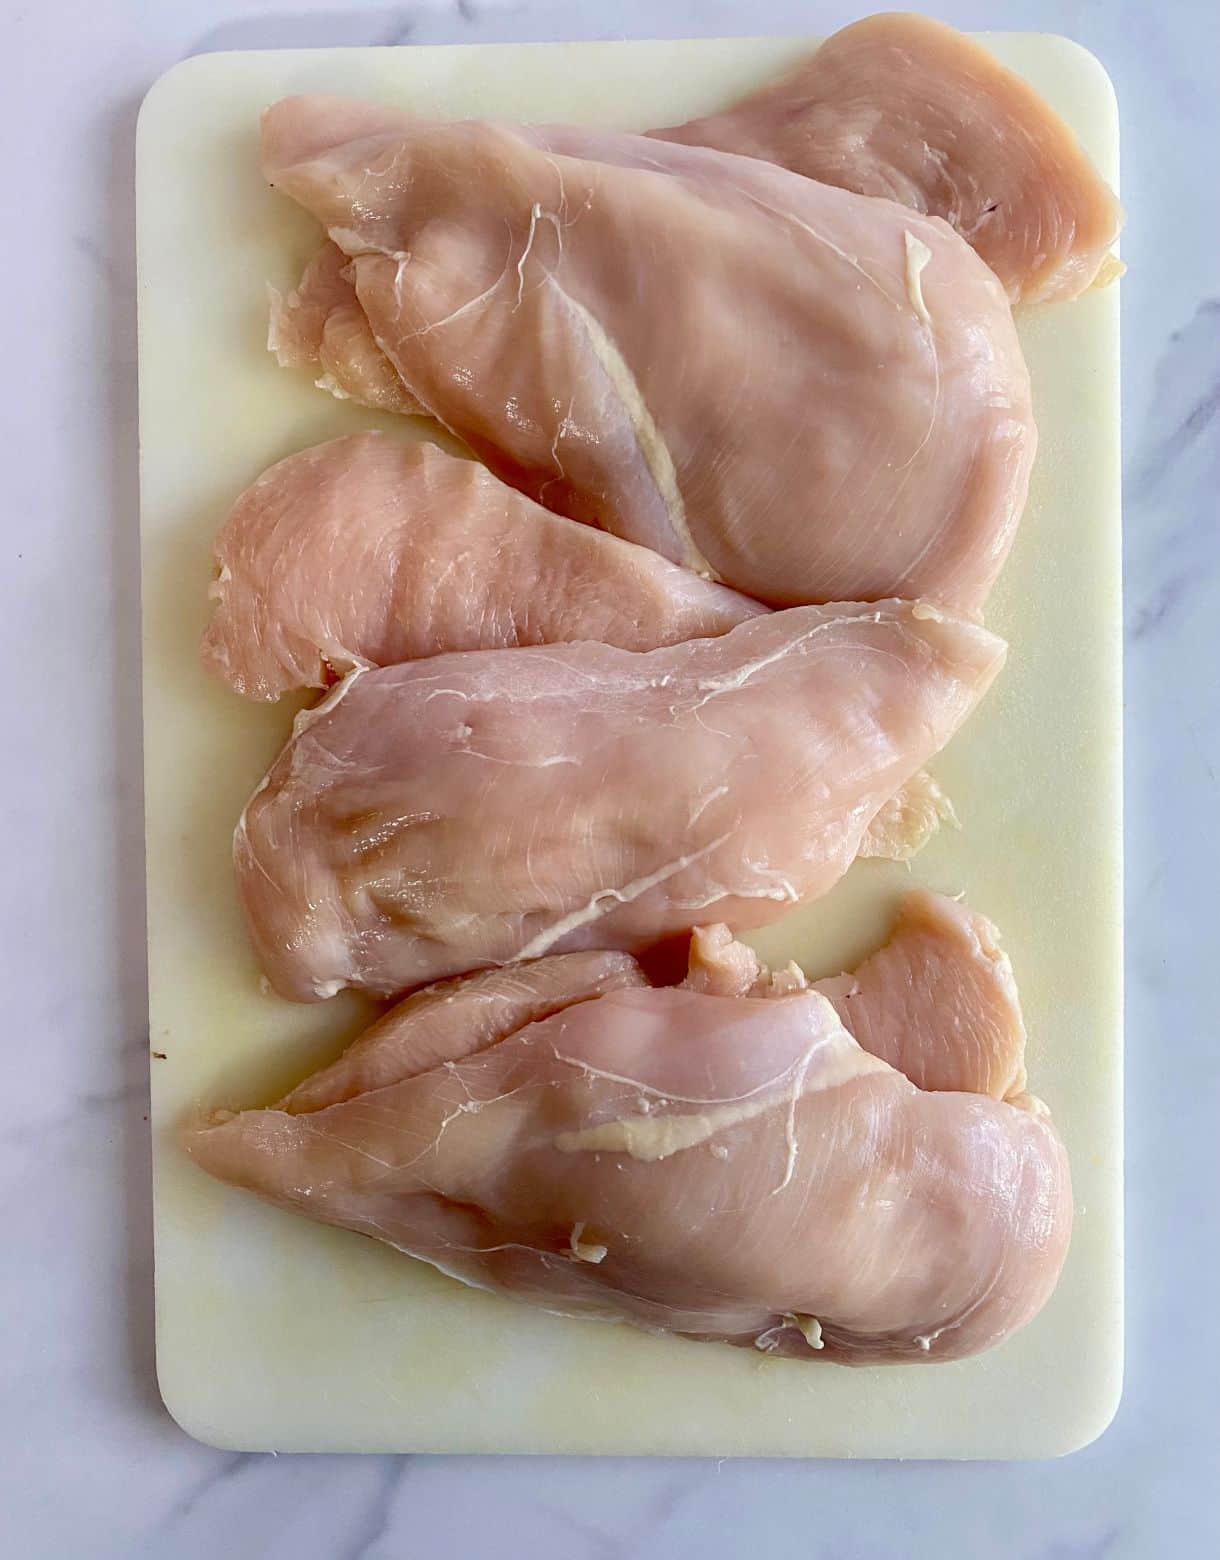 A cutting board with chicken breasts sliced into cutlets.